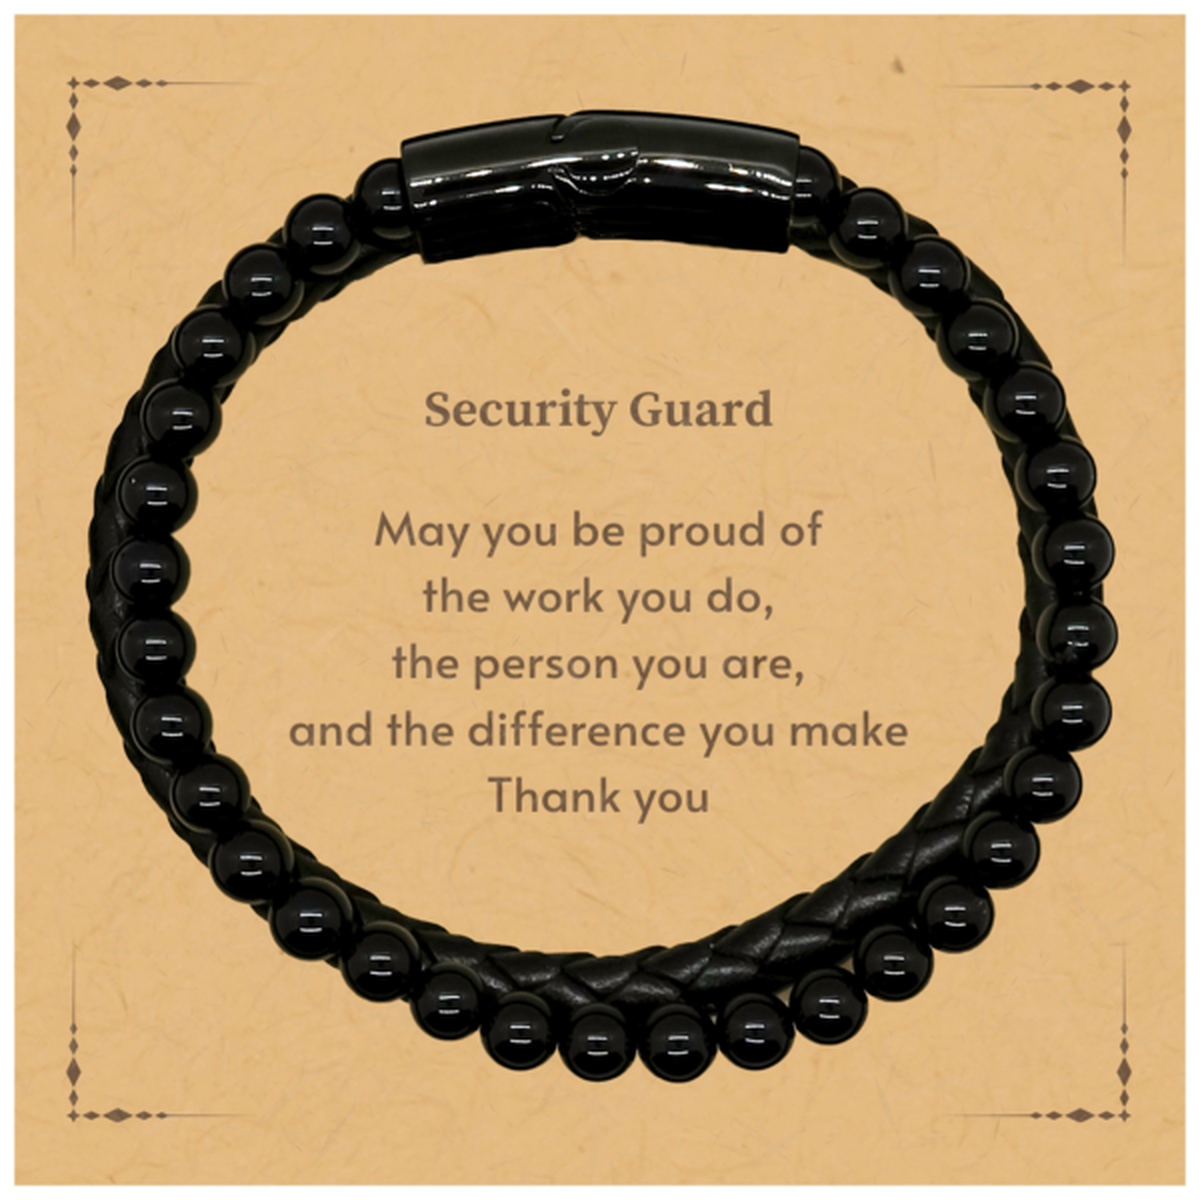 Heartwarming Stone Leather Bracelets Retirement Coworkers Gifts for Security Guard, Security Guard May You be proud of the work you do, the person you are Gifts for Boss Men Women Friends